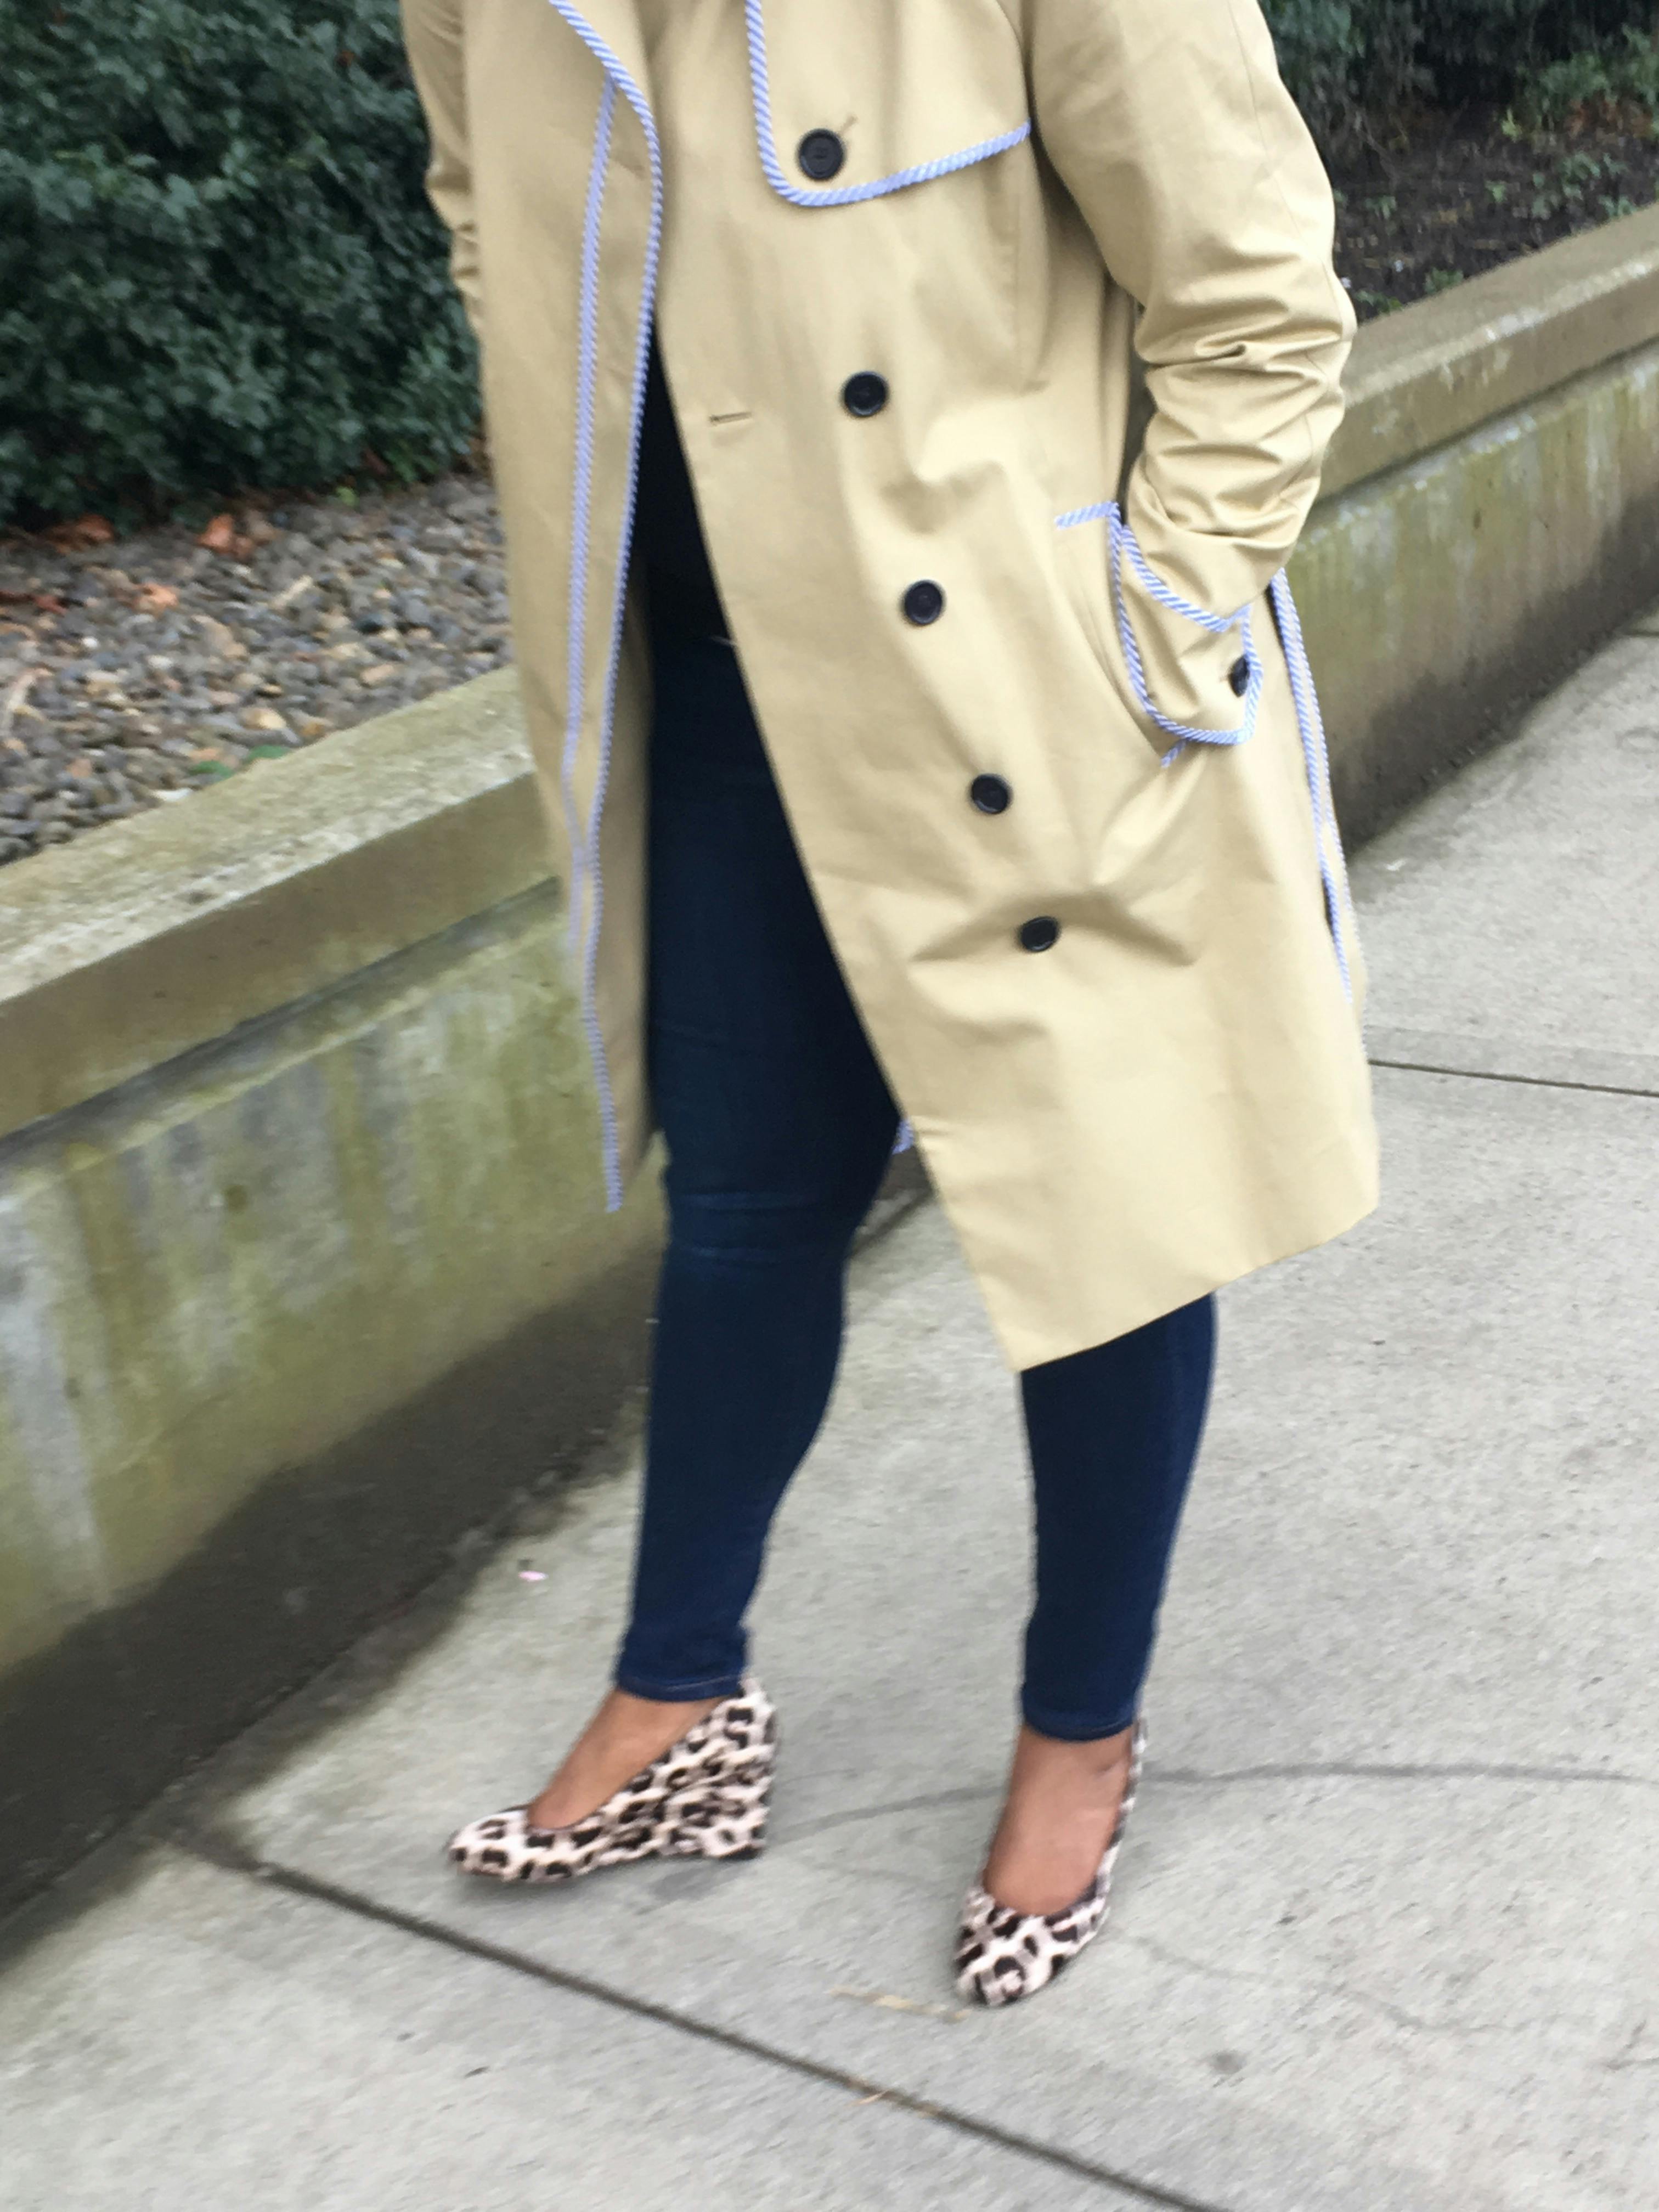 Free stock photo of Cute Shoes and Cute Trench Coat